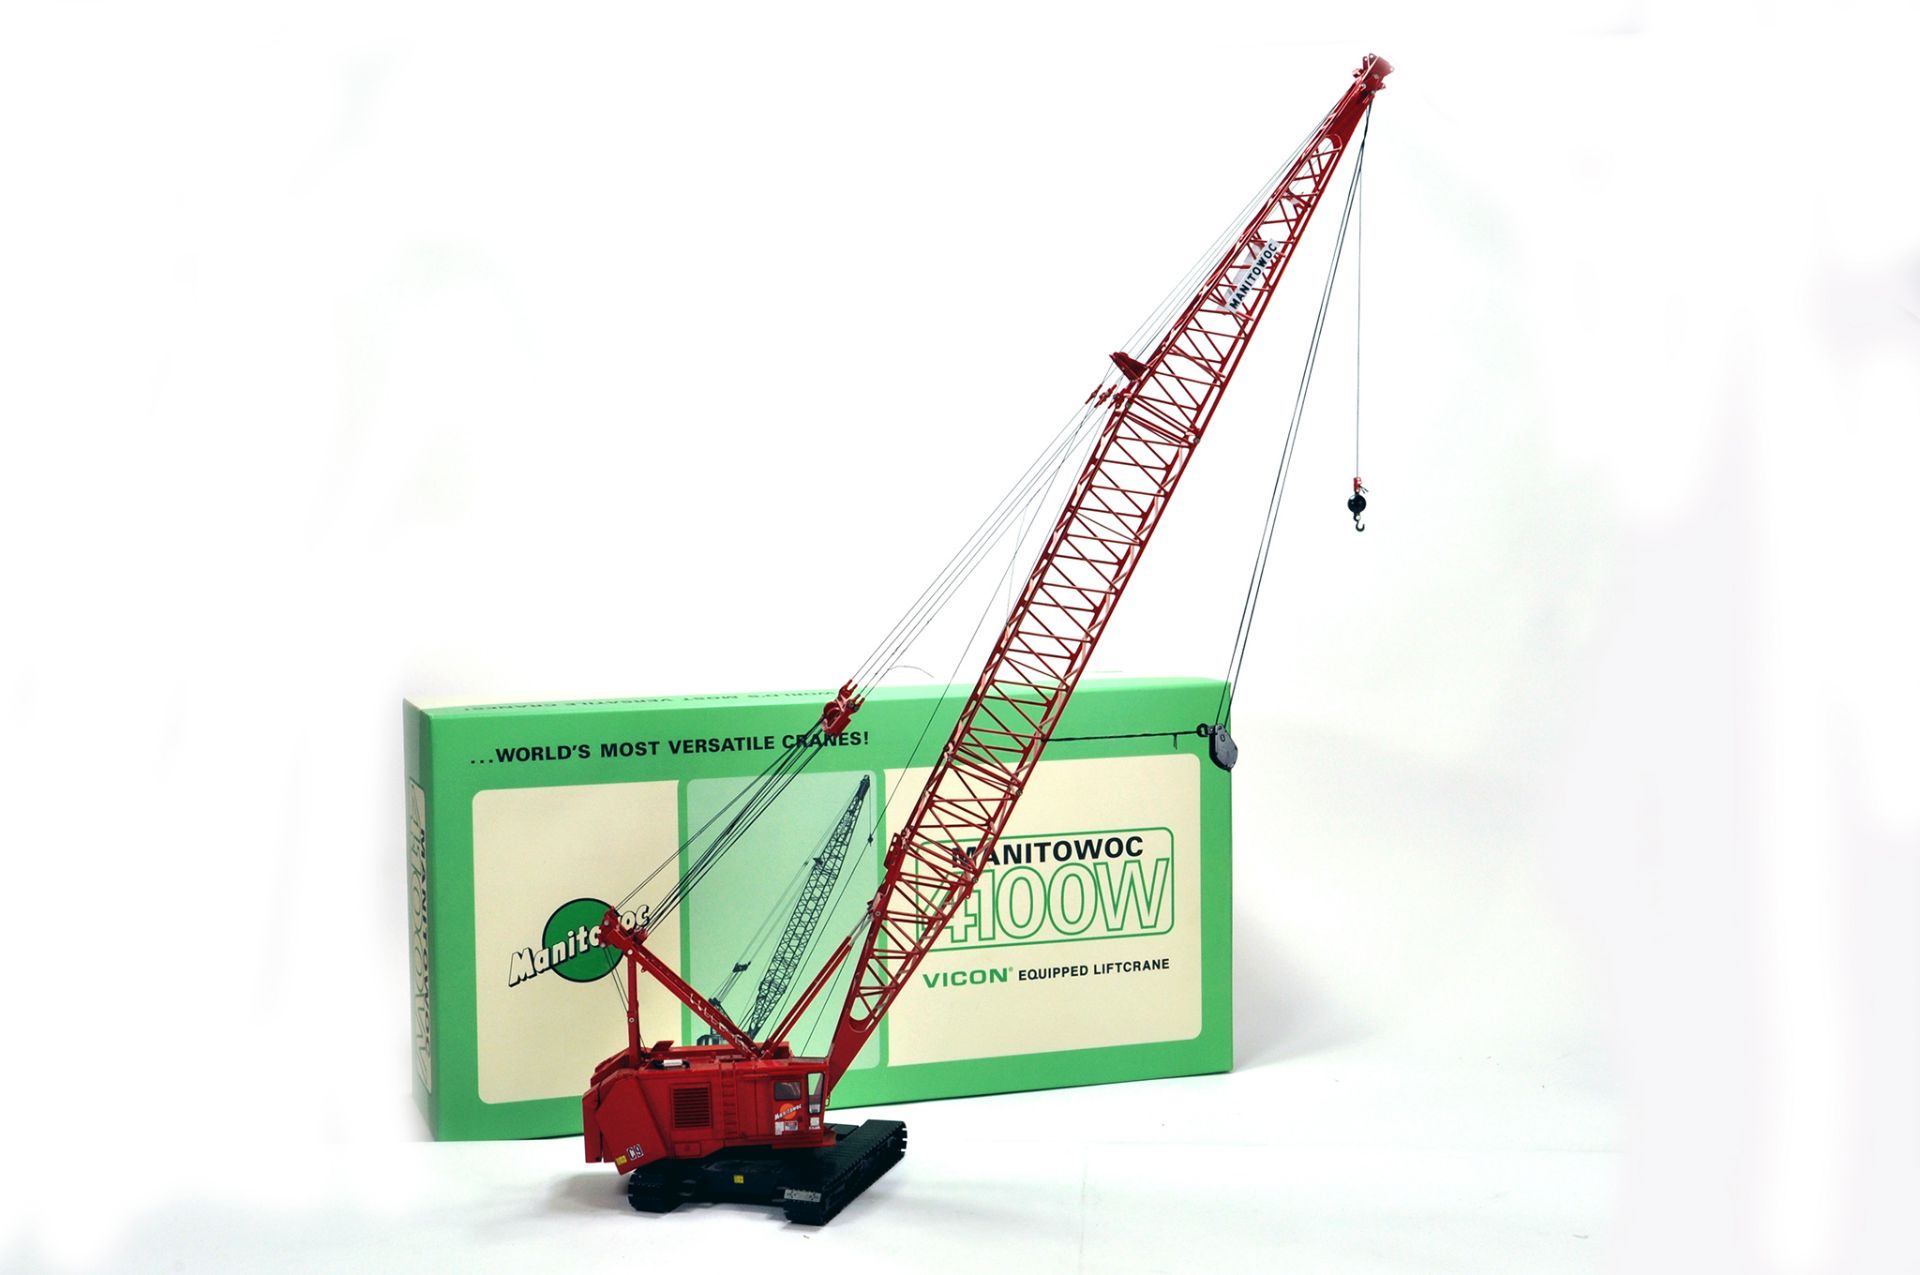 TWH 1/50 Construction issue comprising TWH Manitowoc 4100W Crawler Crane. E to NM with Box.